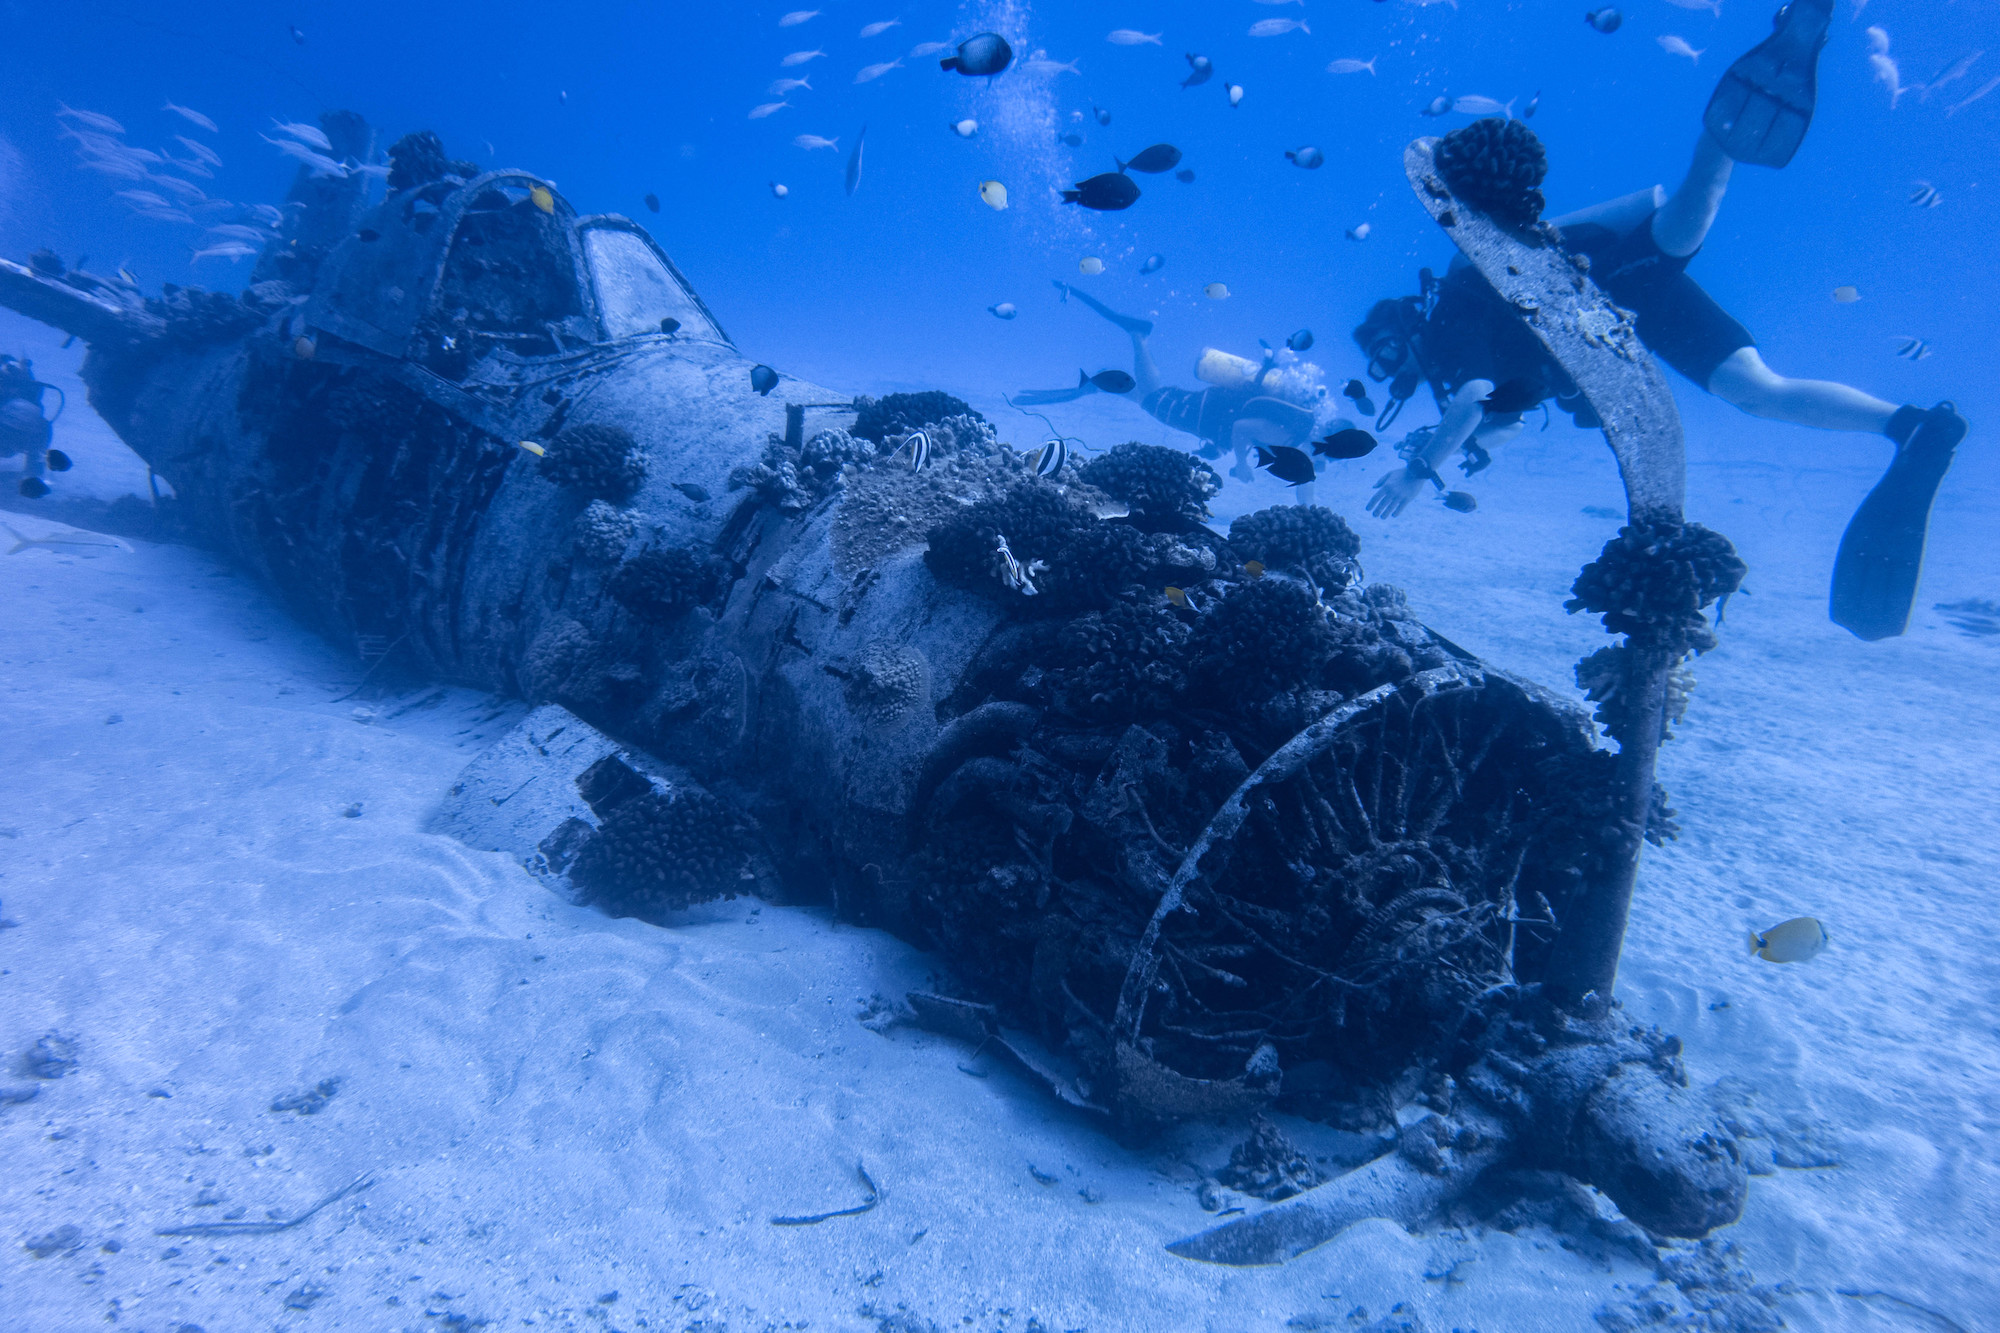 Scuba divers exploring the wreck of the Corsair aircraft, which is an unmissable attraction if you're planning to dive Oahu